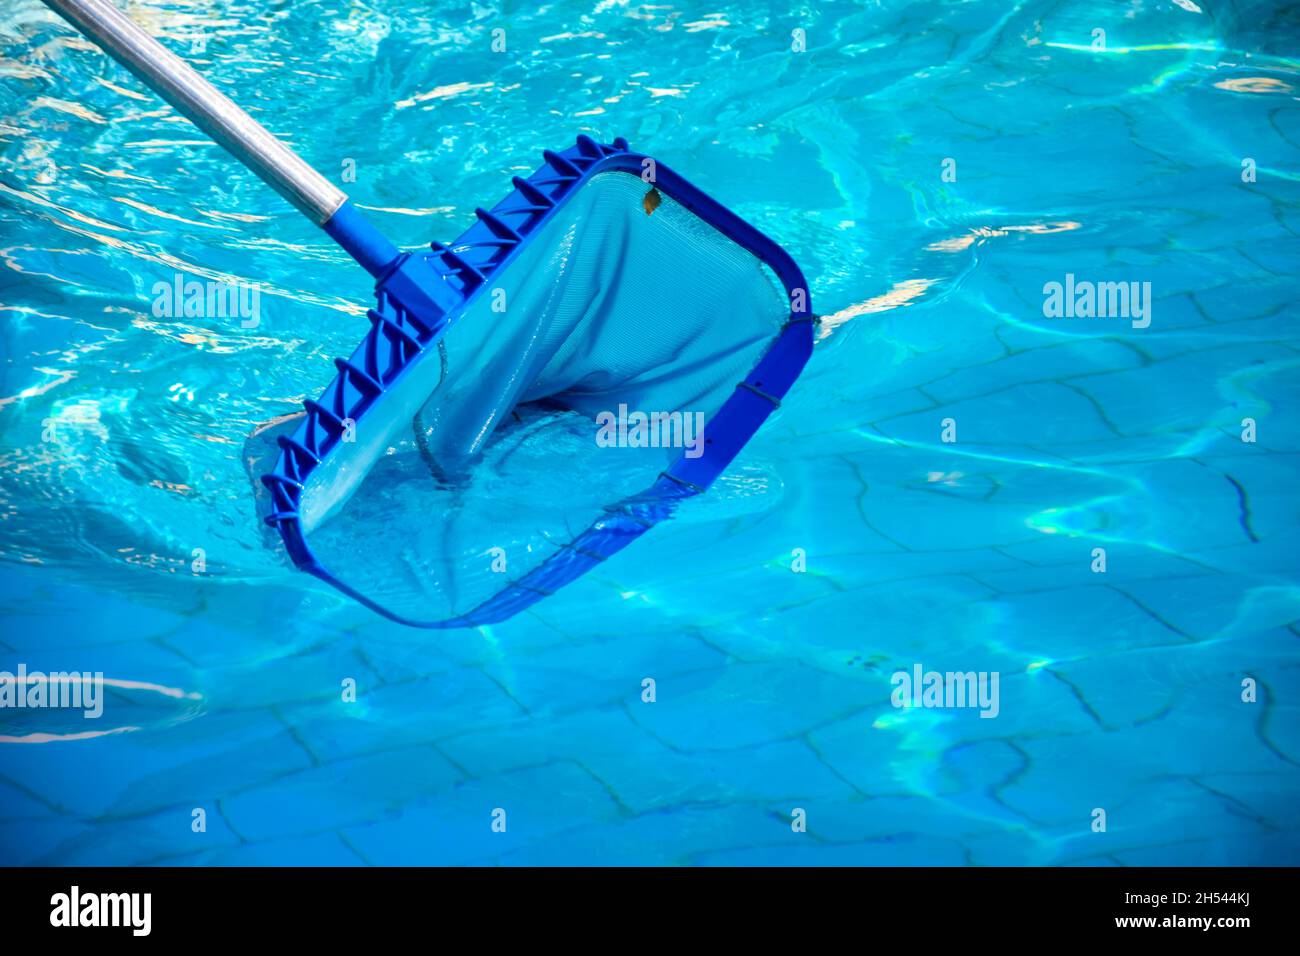 Cleaning pool from garbage with special net. Services of cleaning service company. Clear water with blue tint. Hygiene and healthy lifestyle Stock Photo